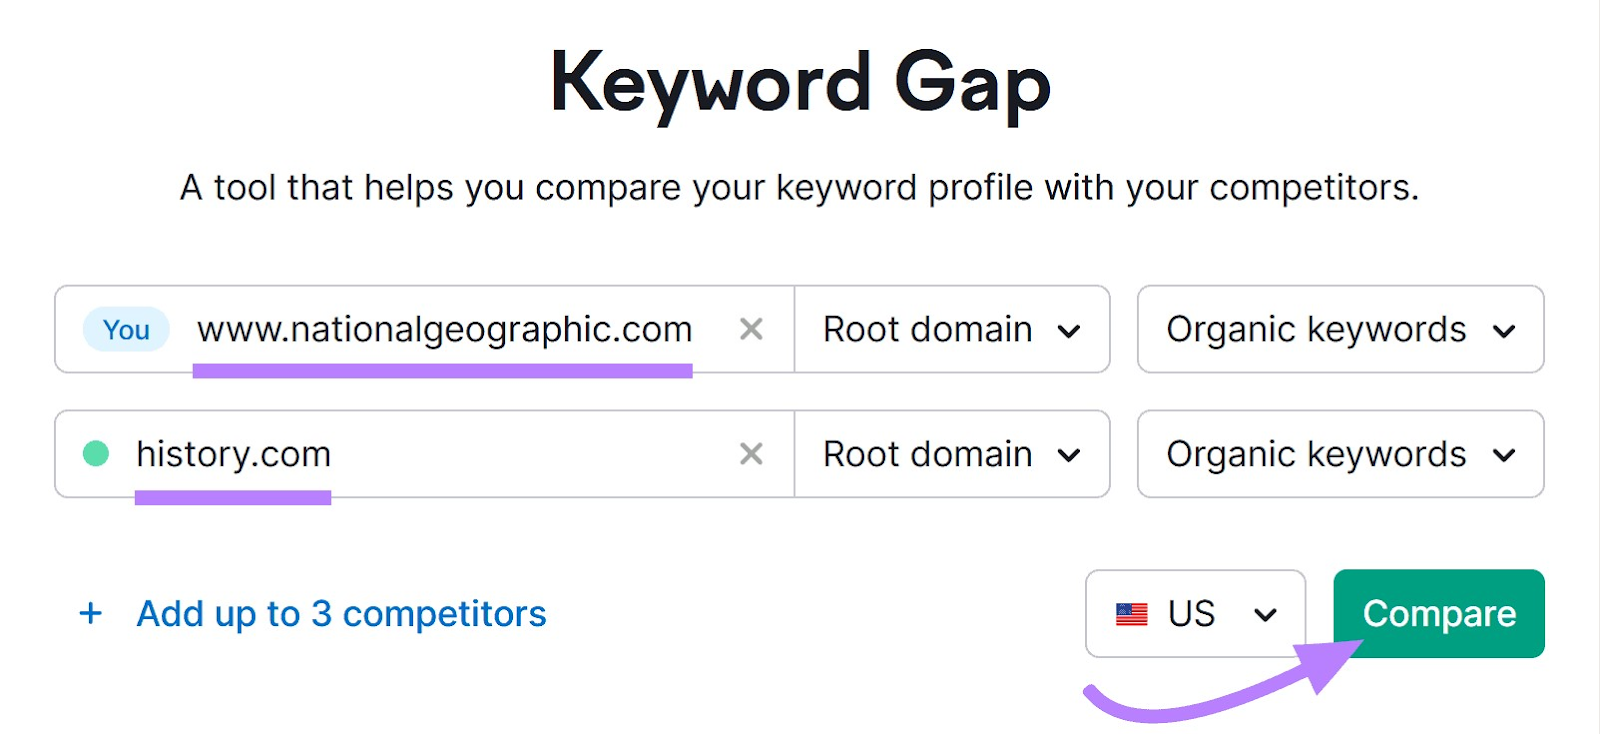 "www.nationalgeographic.com" and "history.com" entered into the Keyword Gap tool search bar